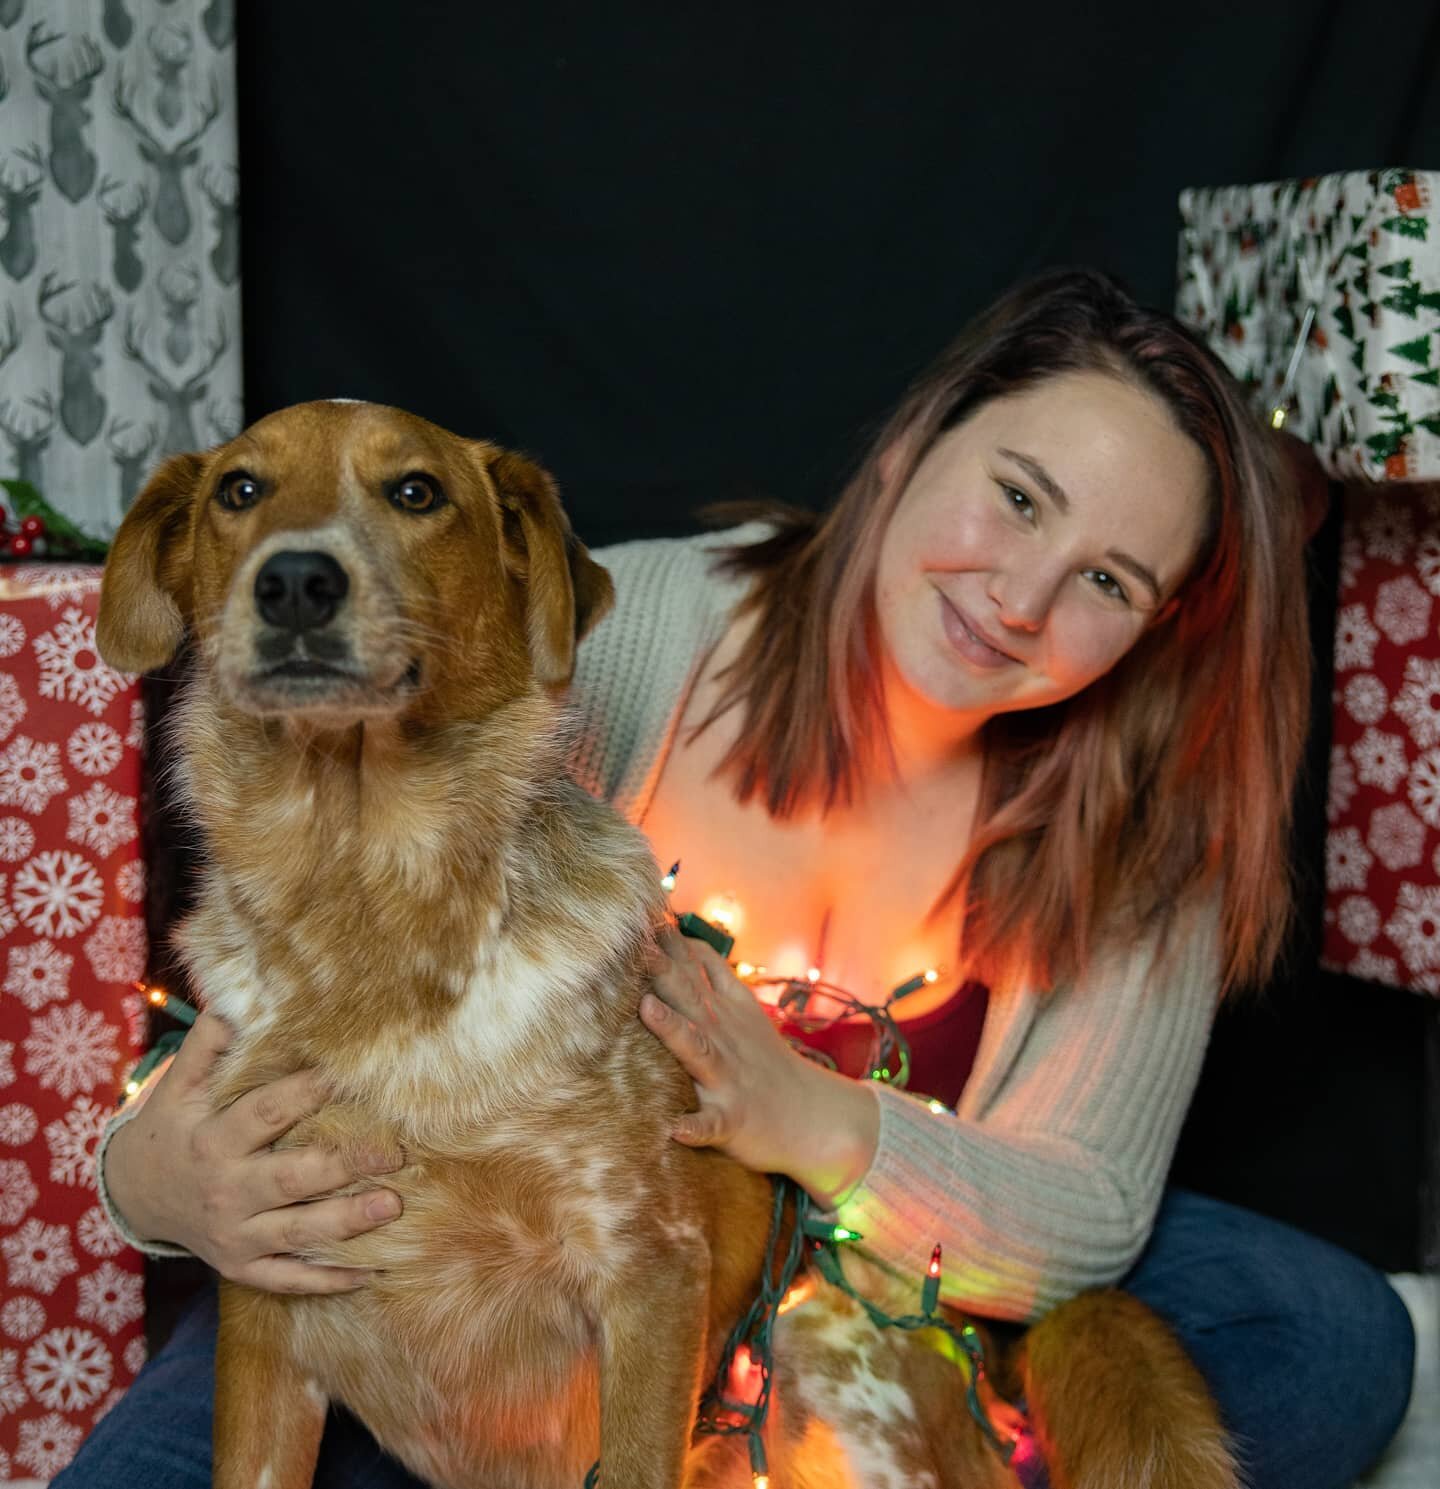 Flynn still doesn't car for close up shots! Too bad mommy wanted a pic with her PUP! Dogs can't wait until we dump their stockings out this year.
-
-
-
#canonusa #christmas2020 #canoneosr #christmaslights #christmas #canonphotography #dogoftheday #do